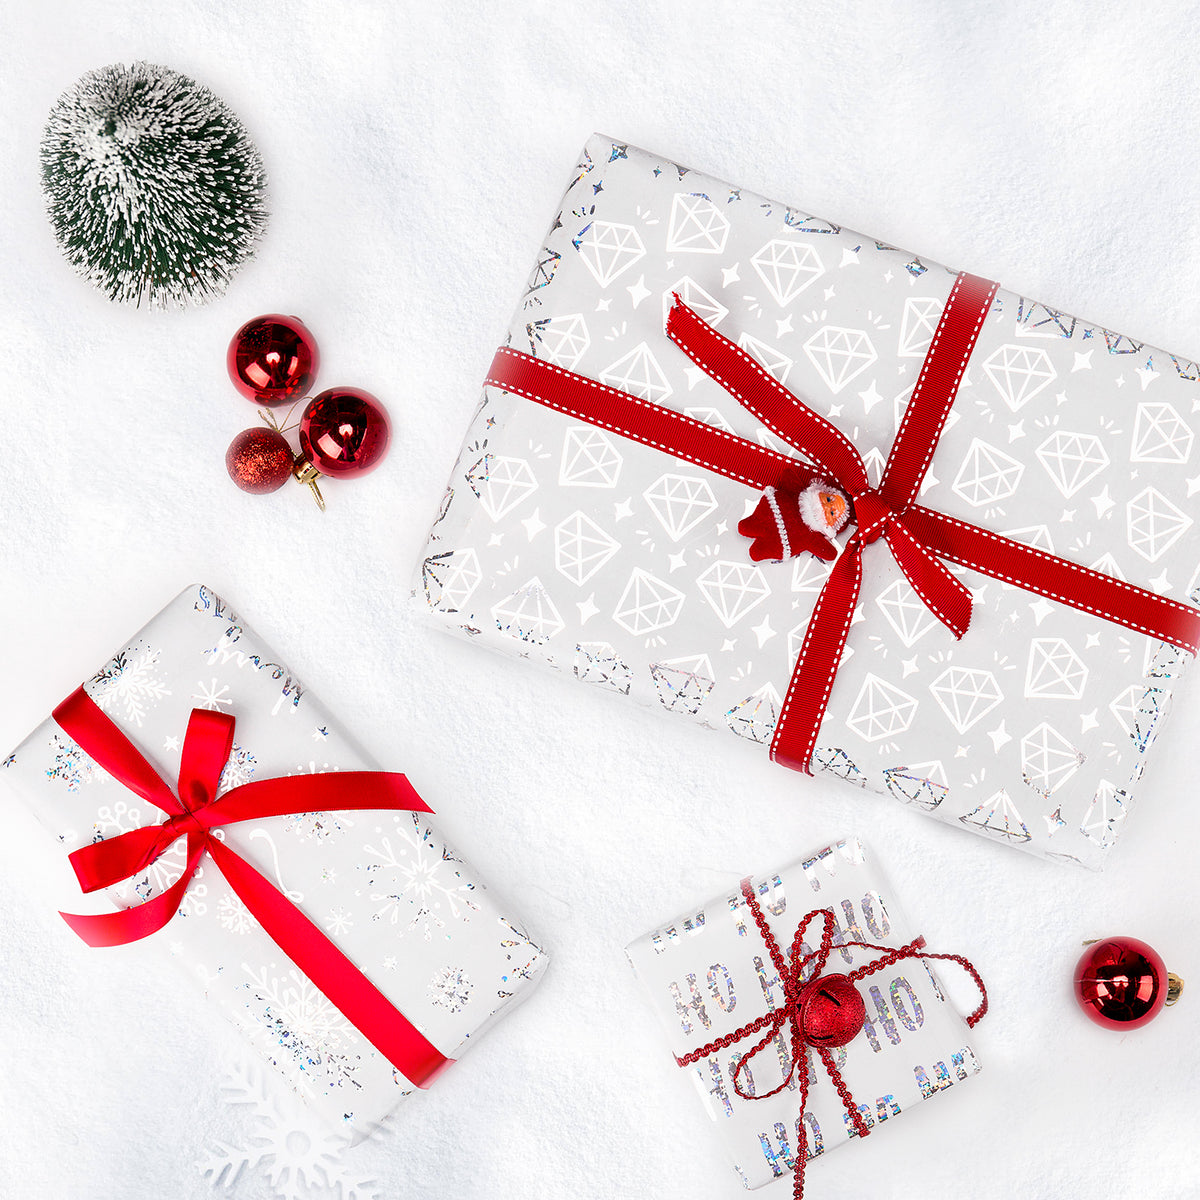 Holiday Gift Wrap Ideas - Day 4: White & Silver –